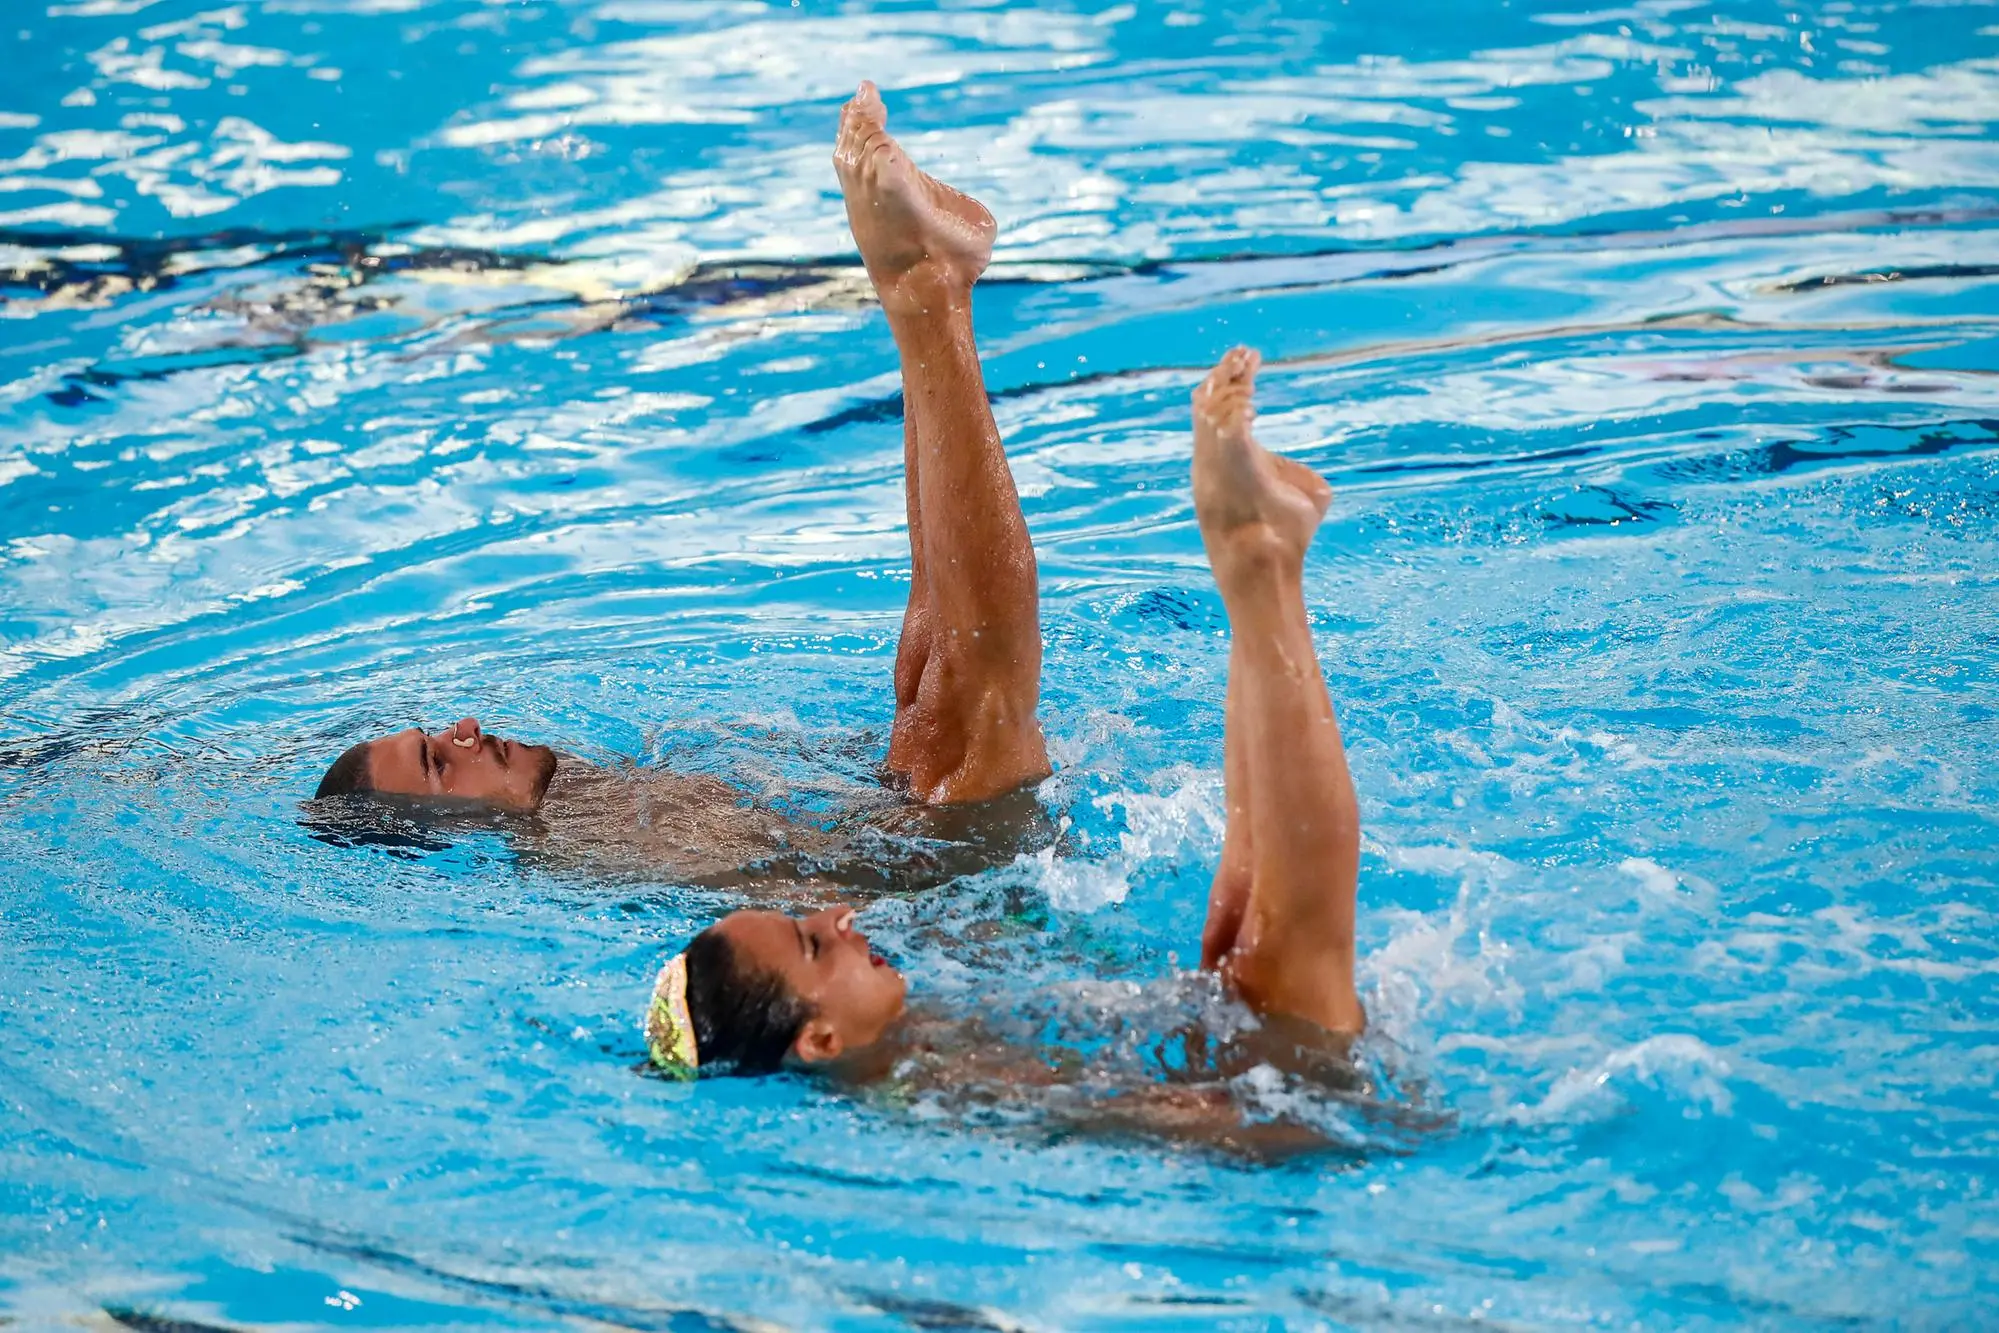 Giorgio Minisini with Lucrezia Ruggero of Italy competes in the Mixed Duet Technical final event during the LEN European Aquatics Championships in Rome, Italy, 15 August 2022. ANSA/ANGELO CARCONI